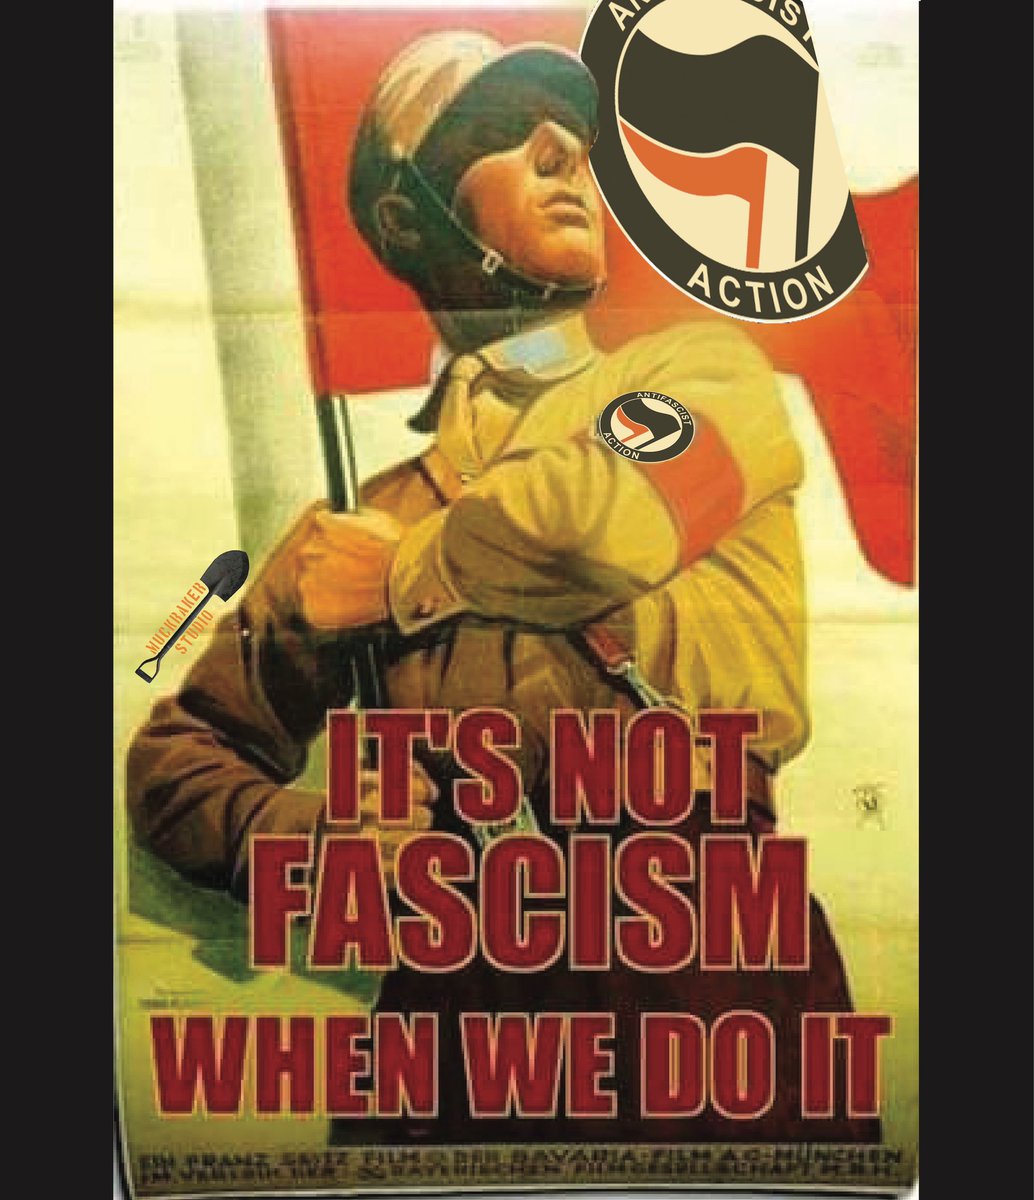 The message also gives insight to the group’s tactics. “Antifascists do not rely on state power to stop fascists.” The AFWG can’t engage in police abolition work, and then engage with the justice system without being hypocrites. They take matters into their own hands. [18/25]